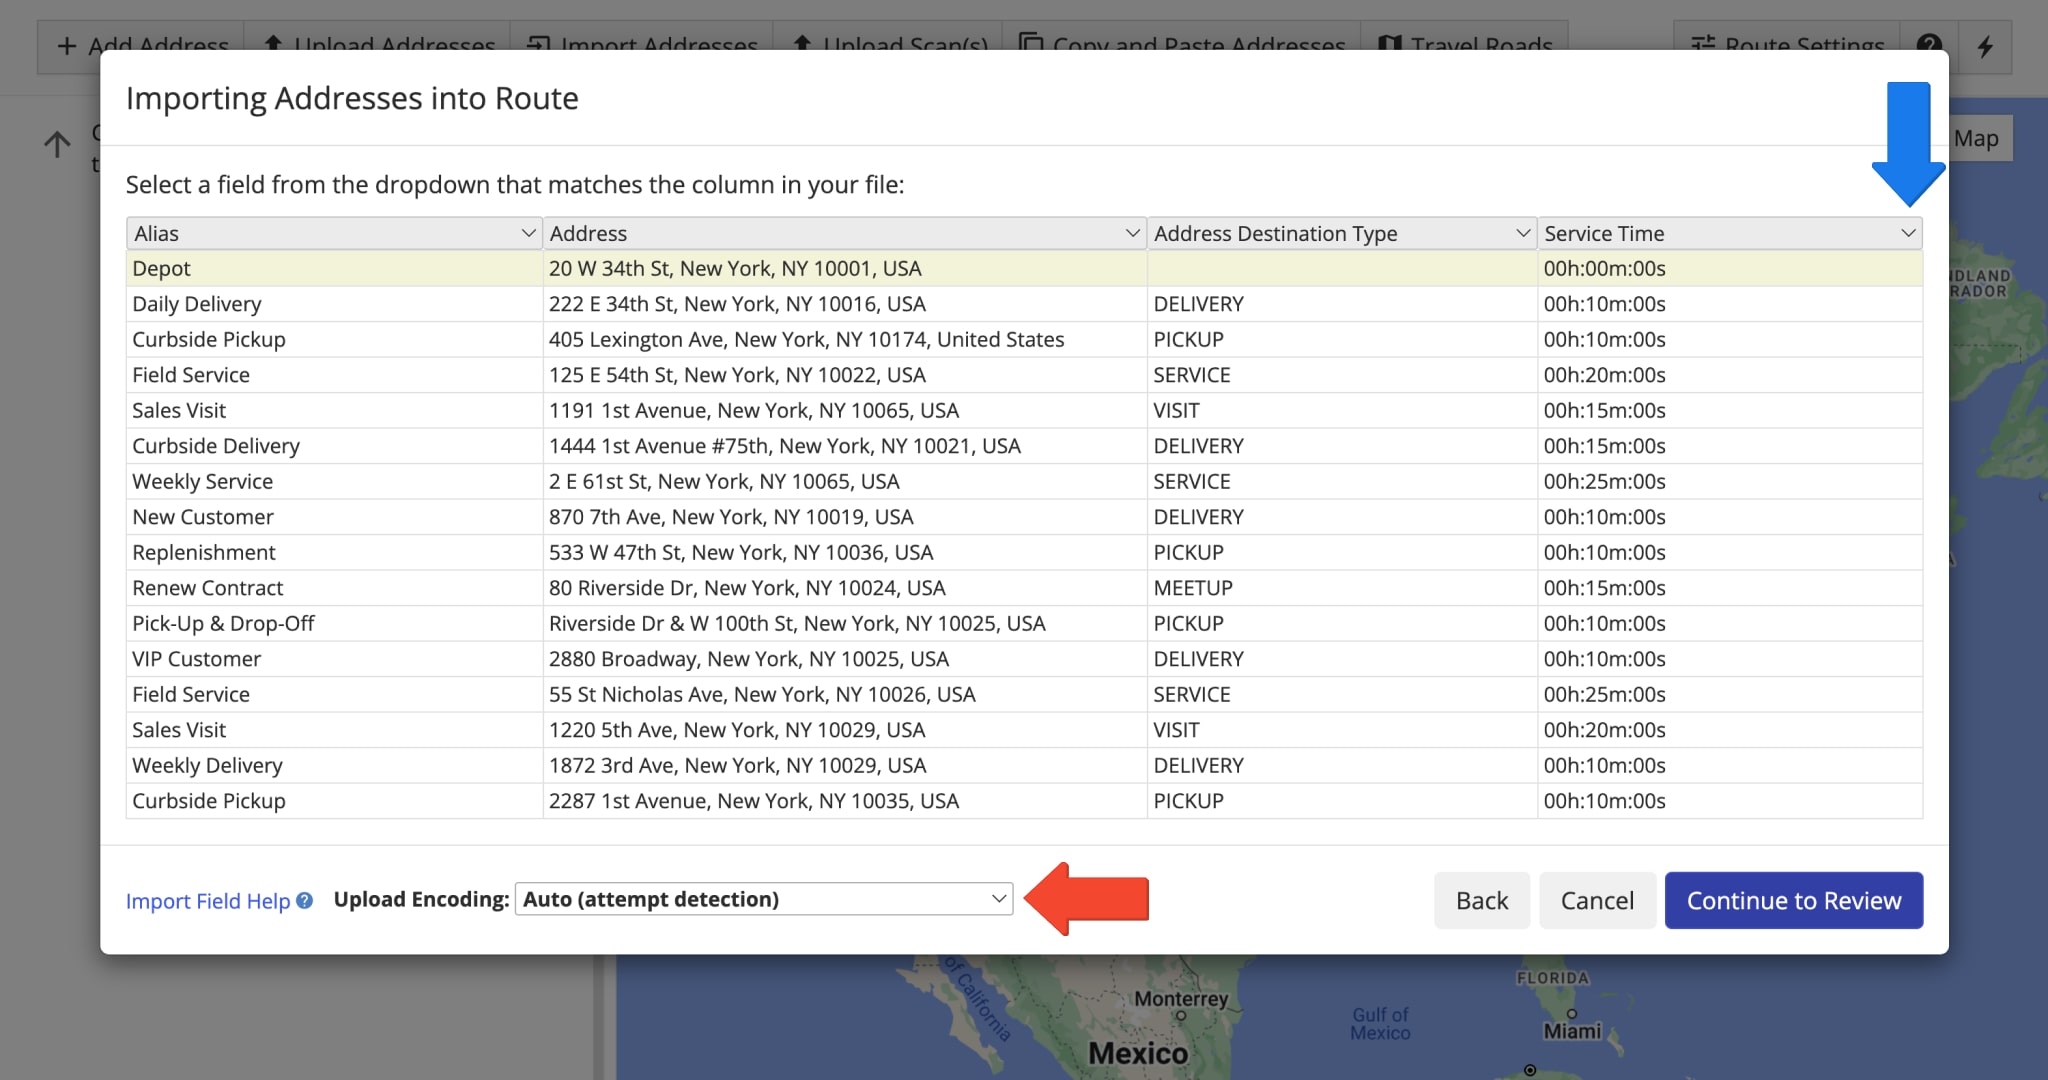 Verify uploaded or imported Service Time in spreadsheets when planning routes.